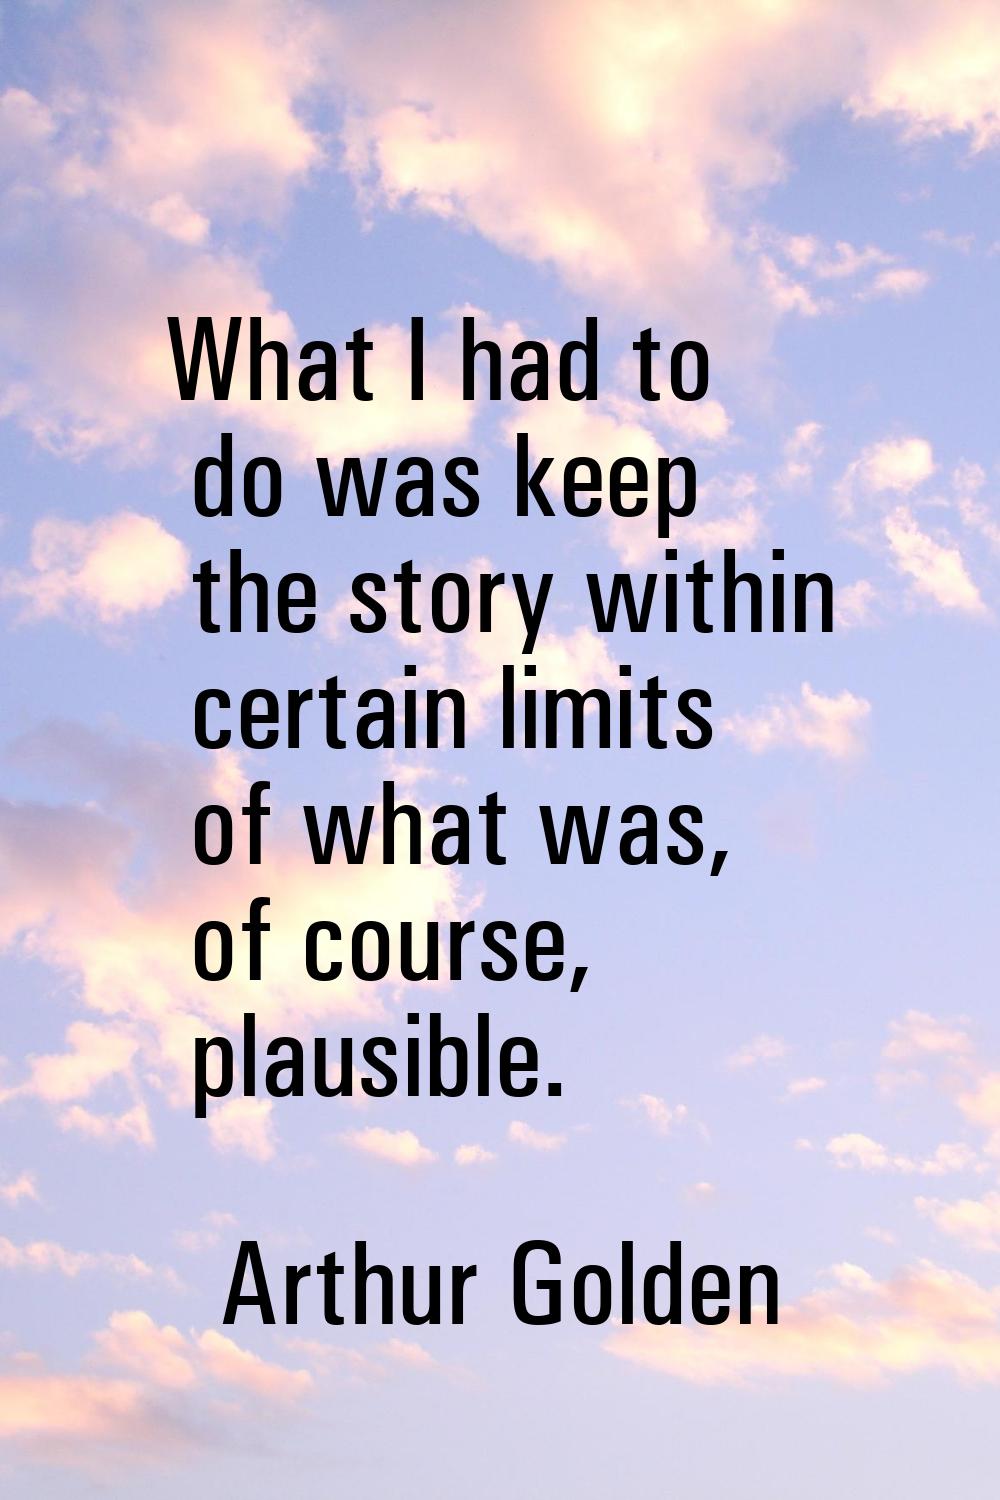 What I had to do was keep the story within certain limits of what was, of course, plausible.